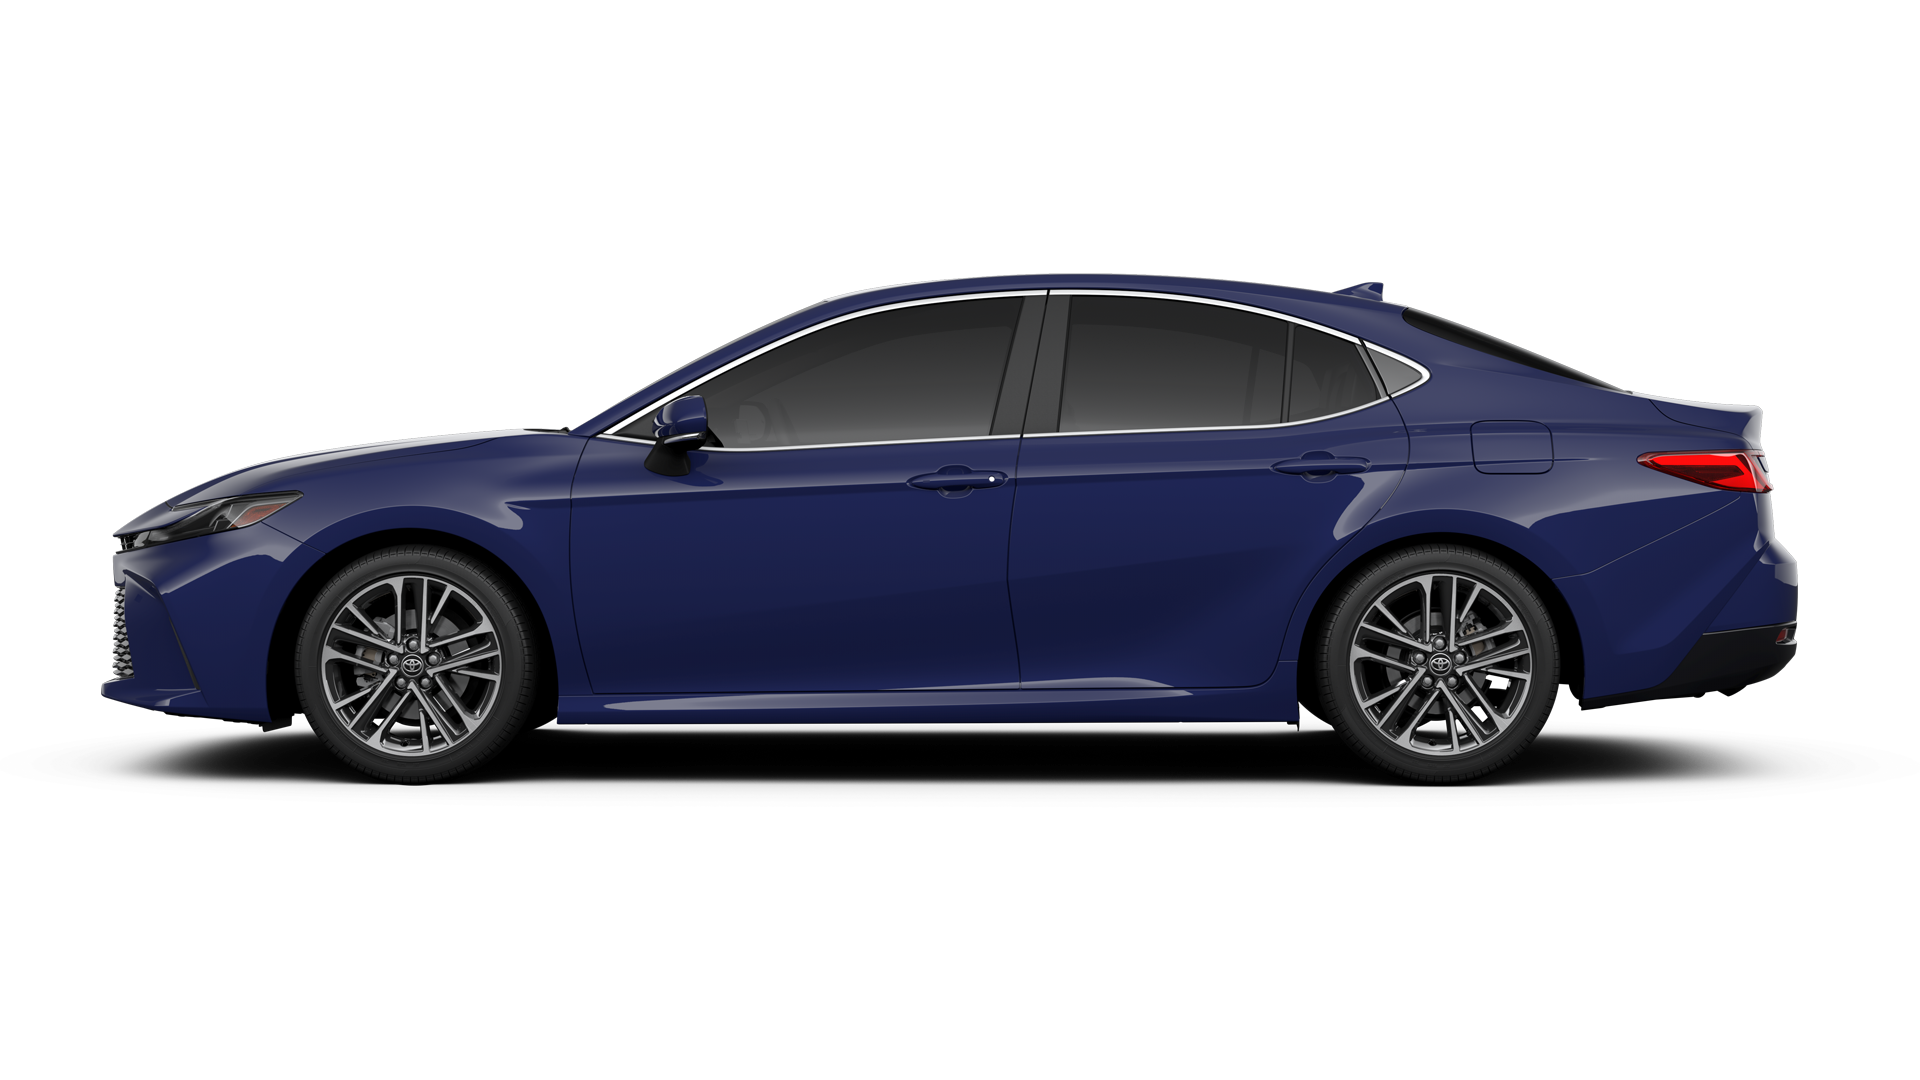 2025 Toyota Camry in Reservoir Blue.